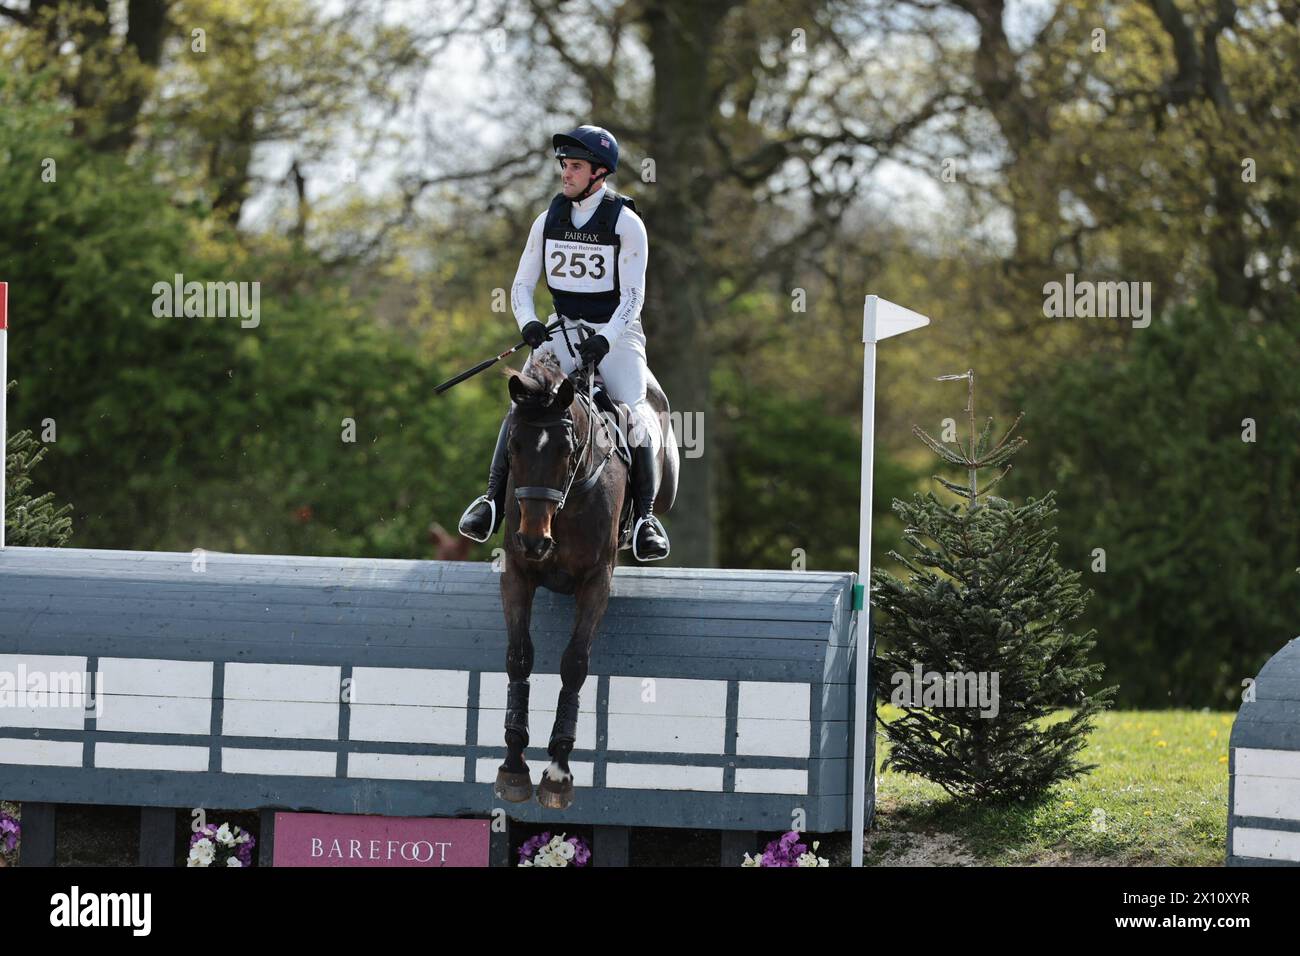 Burnham Market, Norfolk, UK. 14th Apr, 2024. Ben Way of Great Britain with GUN LAW during the CCI4*-S cross country at the Burnham Market International Horse Trials on April 14, 2024, Burnham Market, United Kingdom (Photo by Maxime David Credit: MXIMD Pictures/Alamy Live News Credit: MXIMD Pictures/Alamy Live News Stock Photo